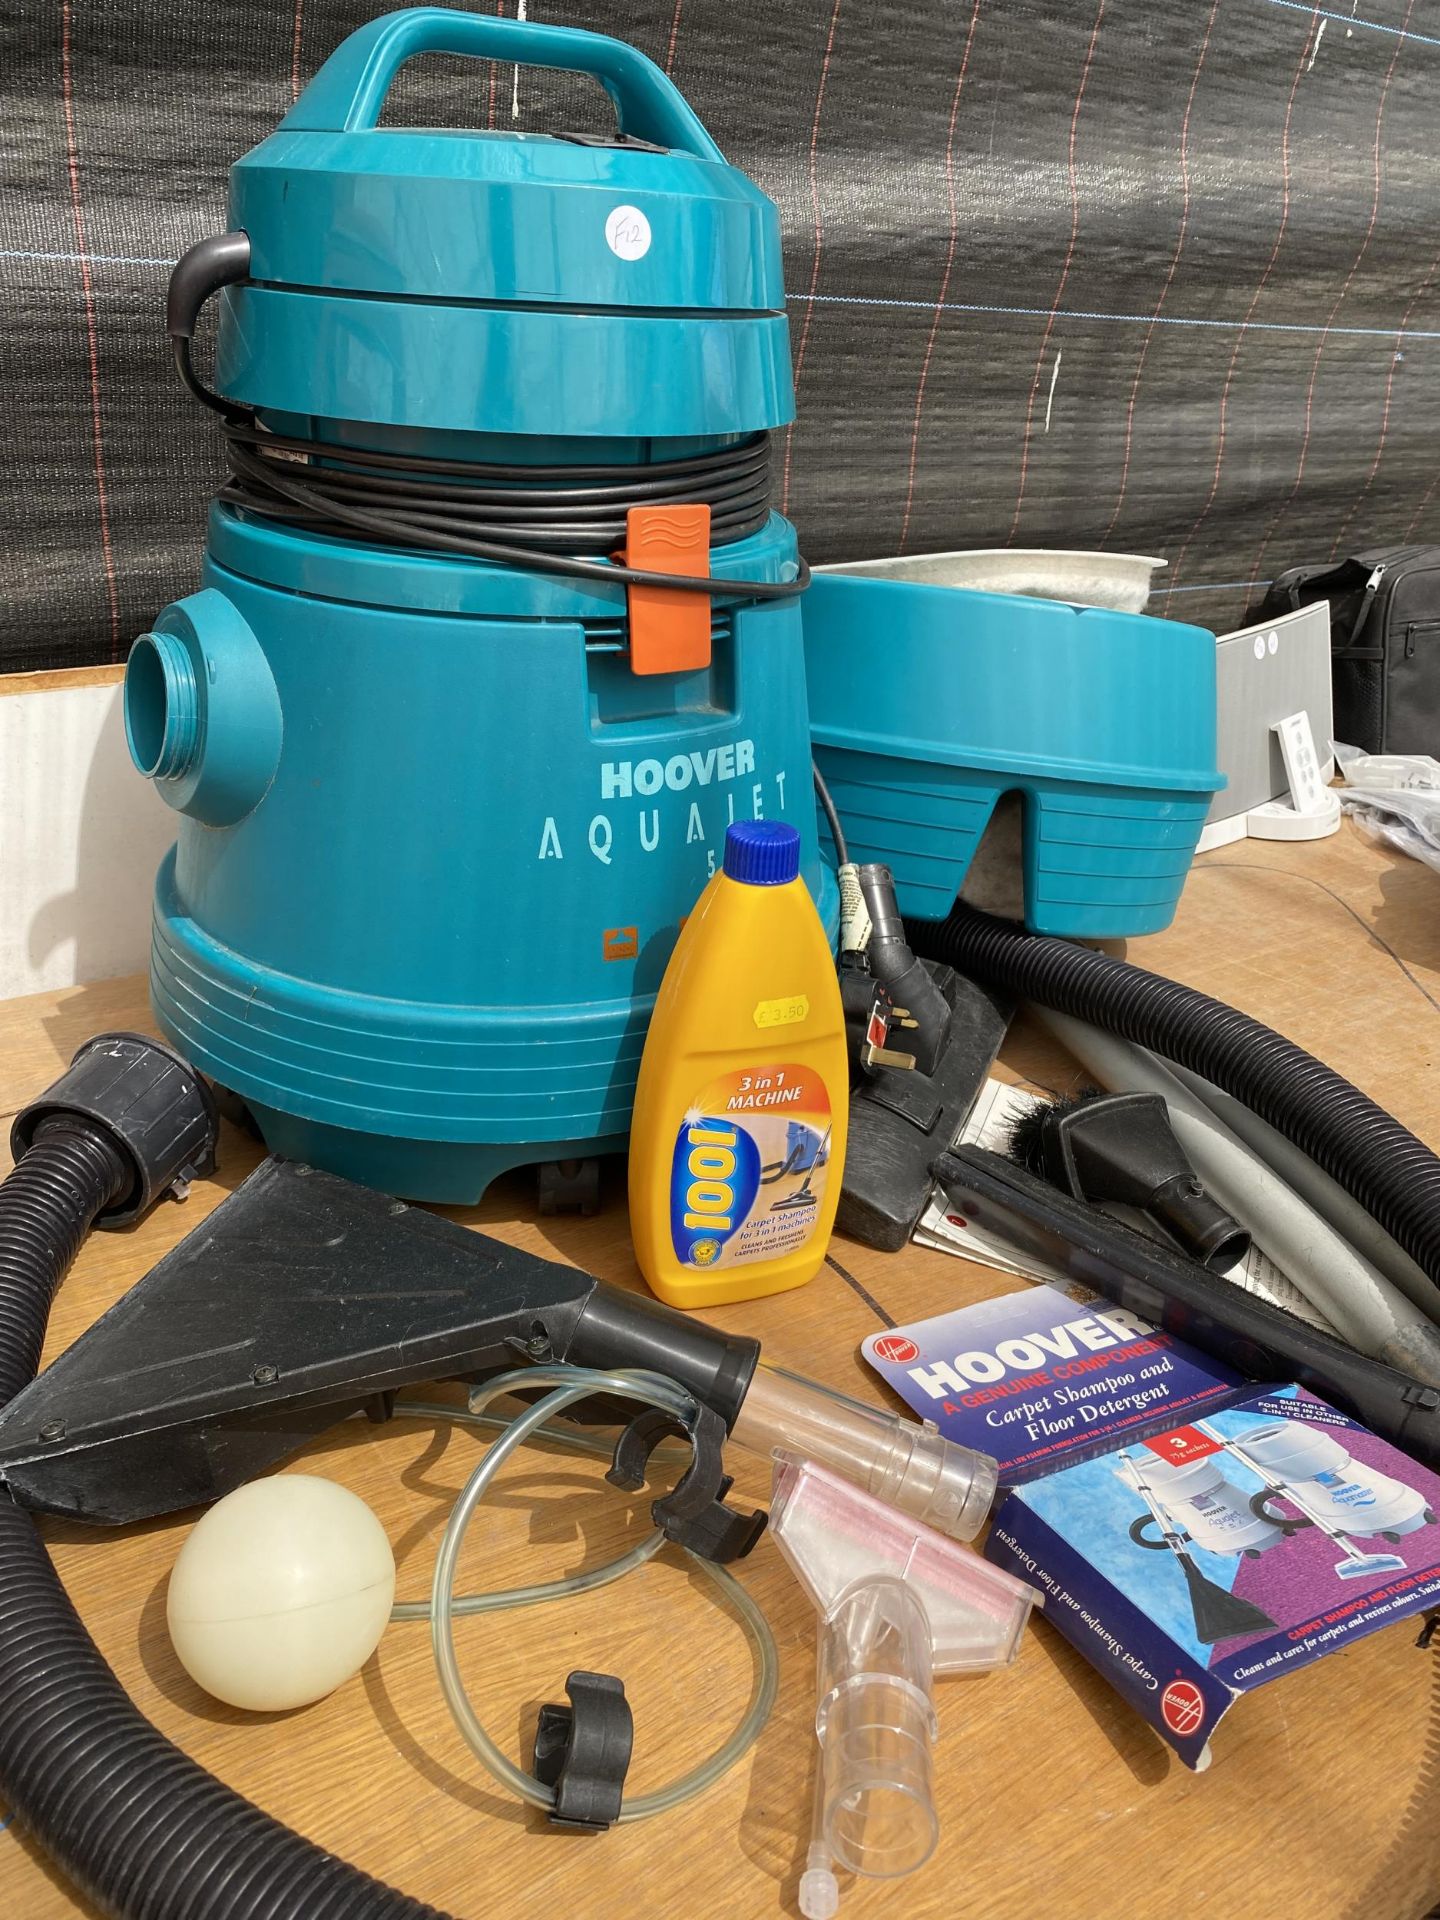 A HOOVER AQUAJET 5000 CARPET CLEANER WITH VARIOUS ATTATCHMENTS - Image 2 of 2